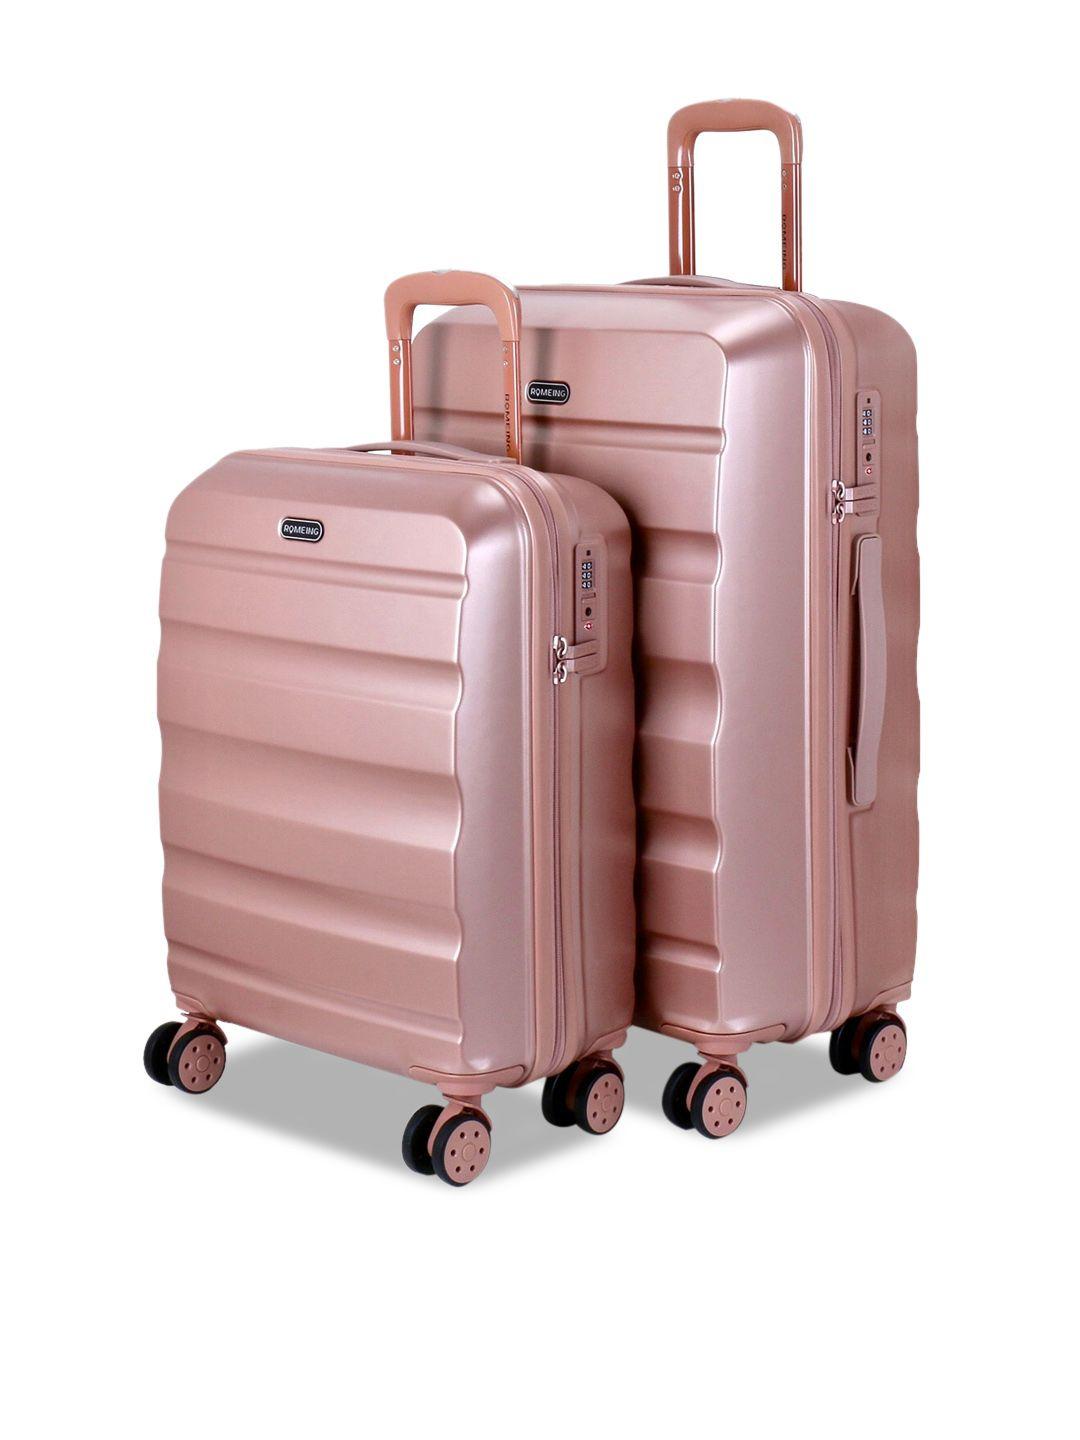 romeing venice set of 2 rose gold patterned hard-sided polycarbonate trolley bags